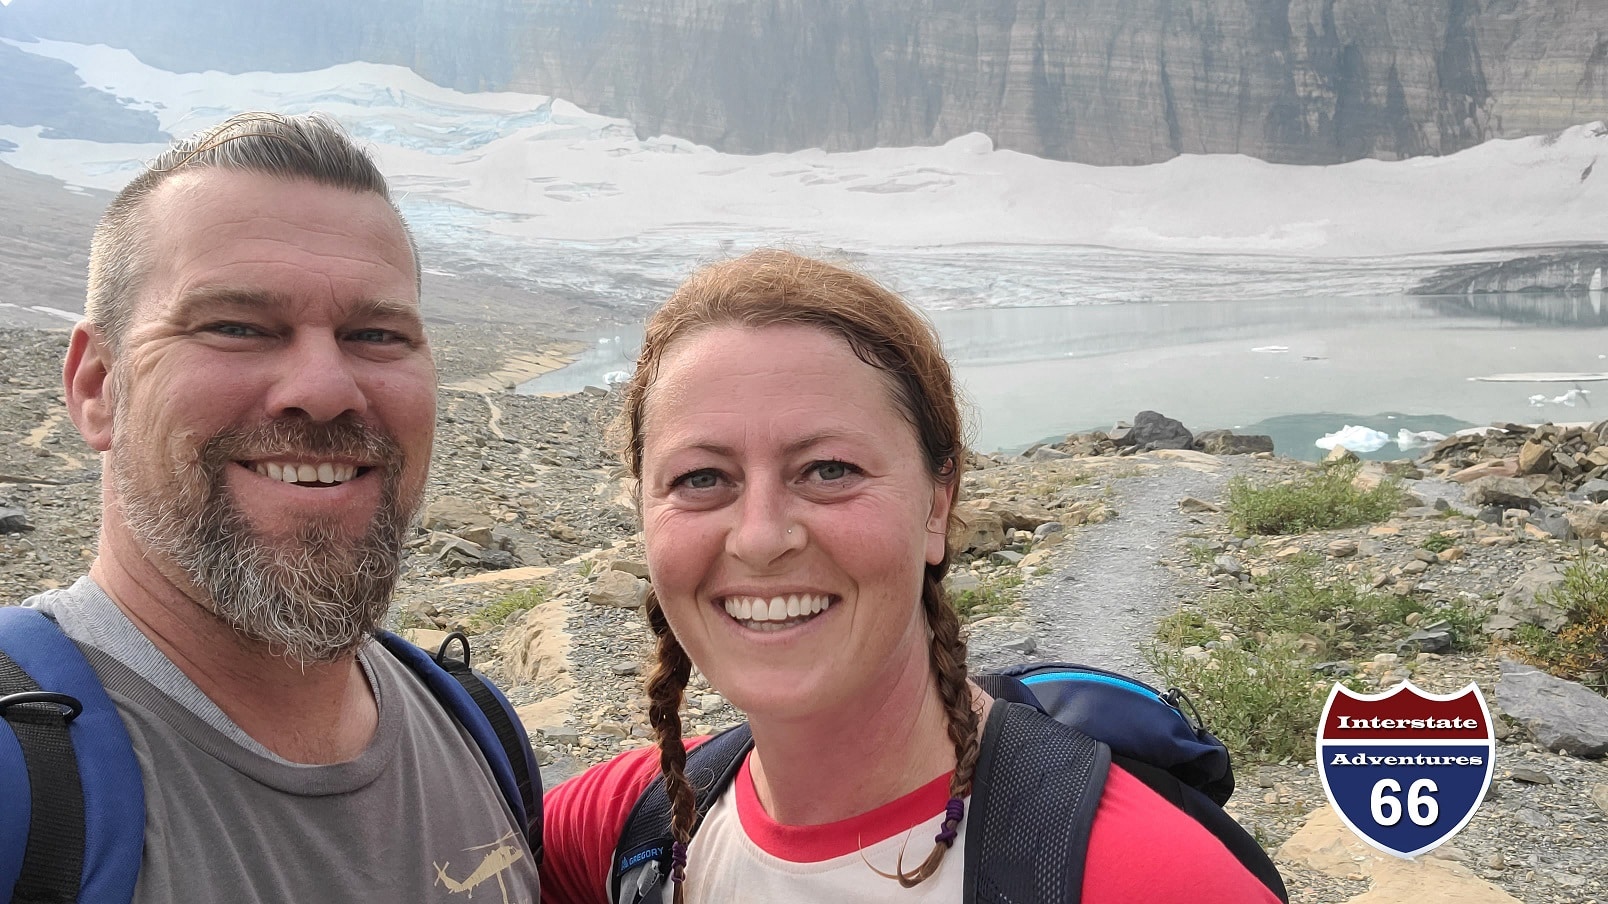 Interstate Adventures with the Grinnell Glacier behind us.